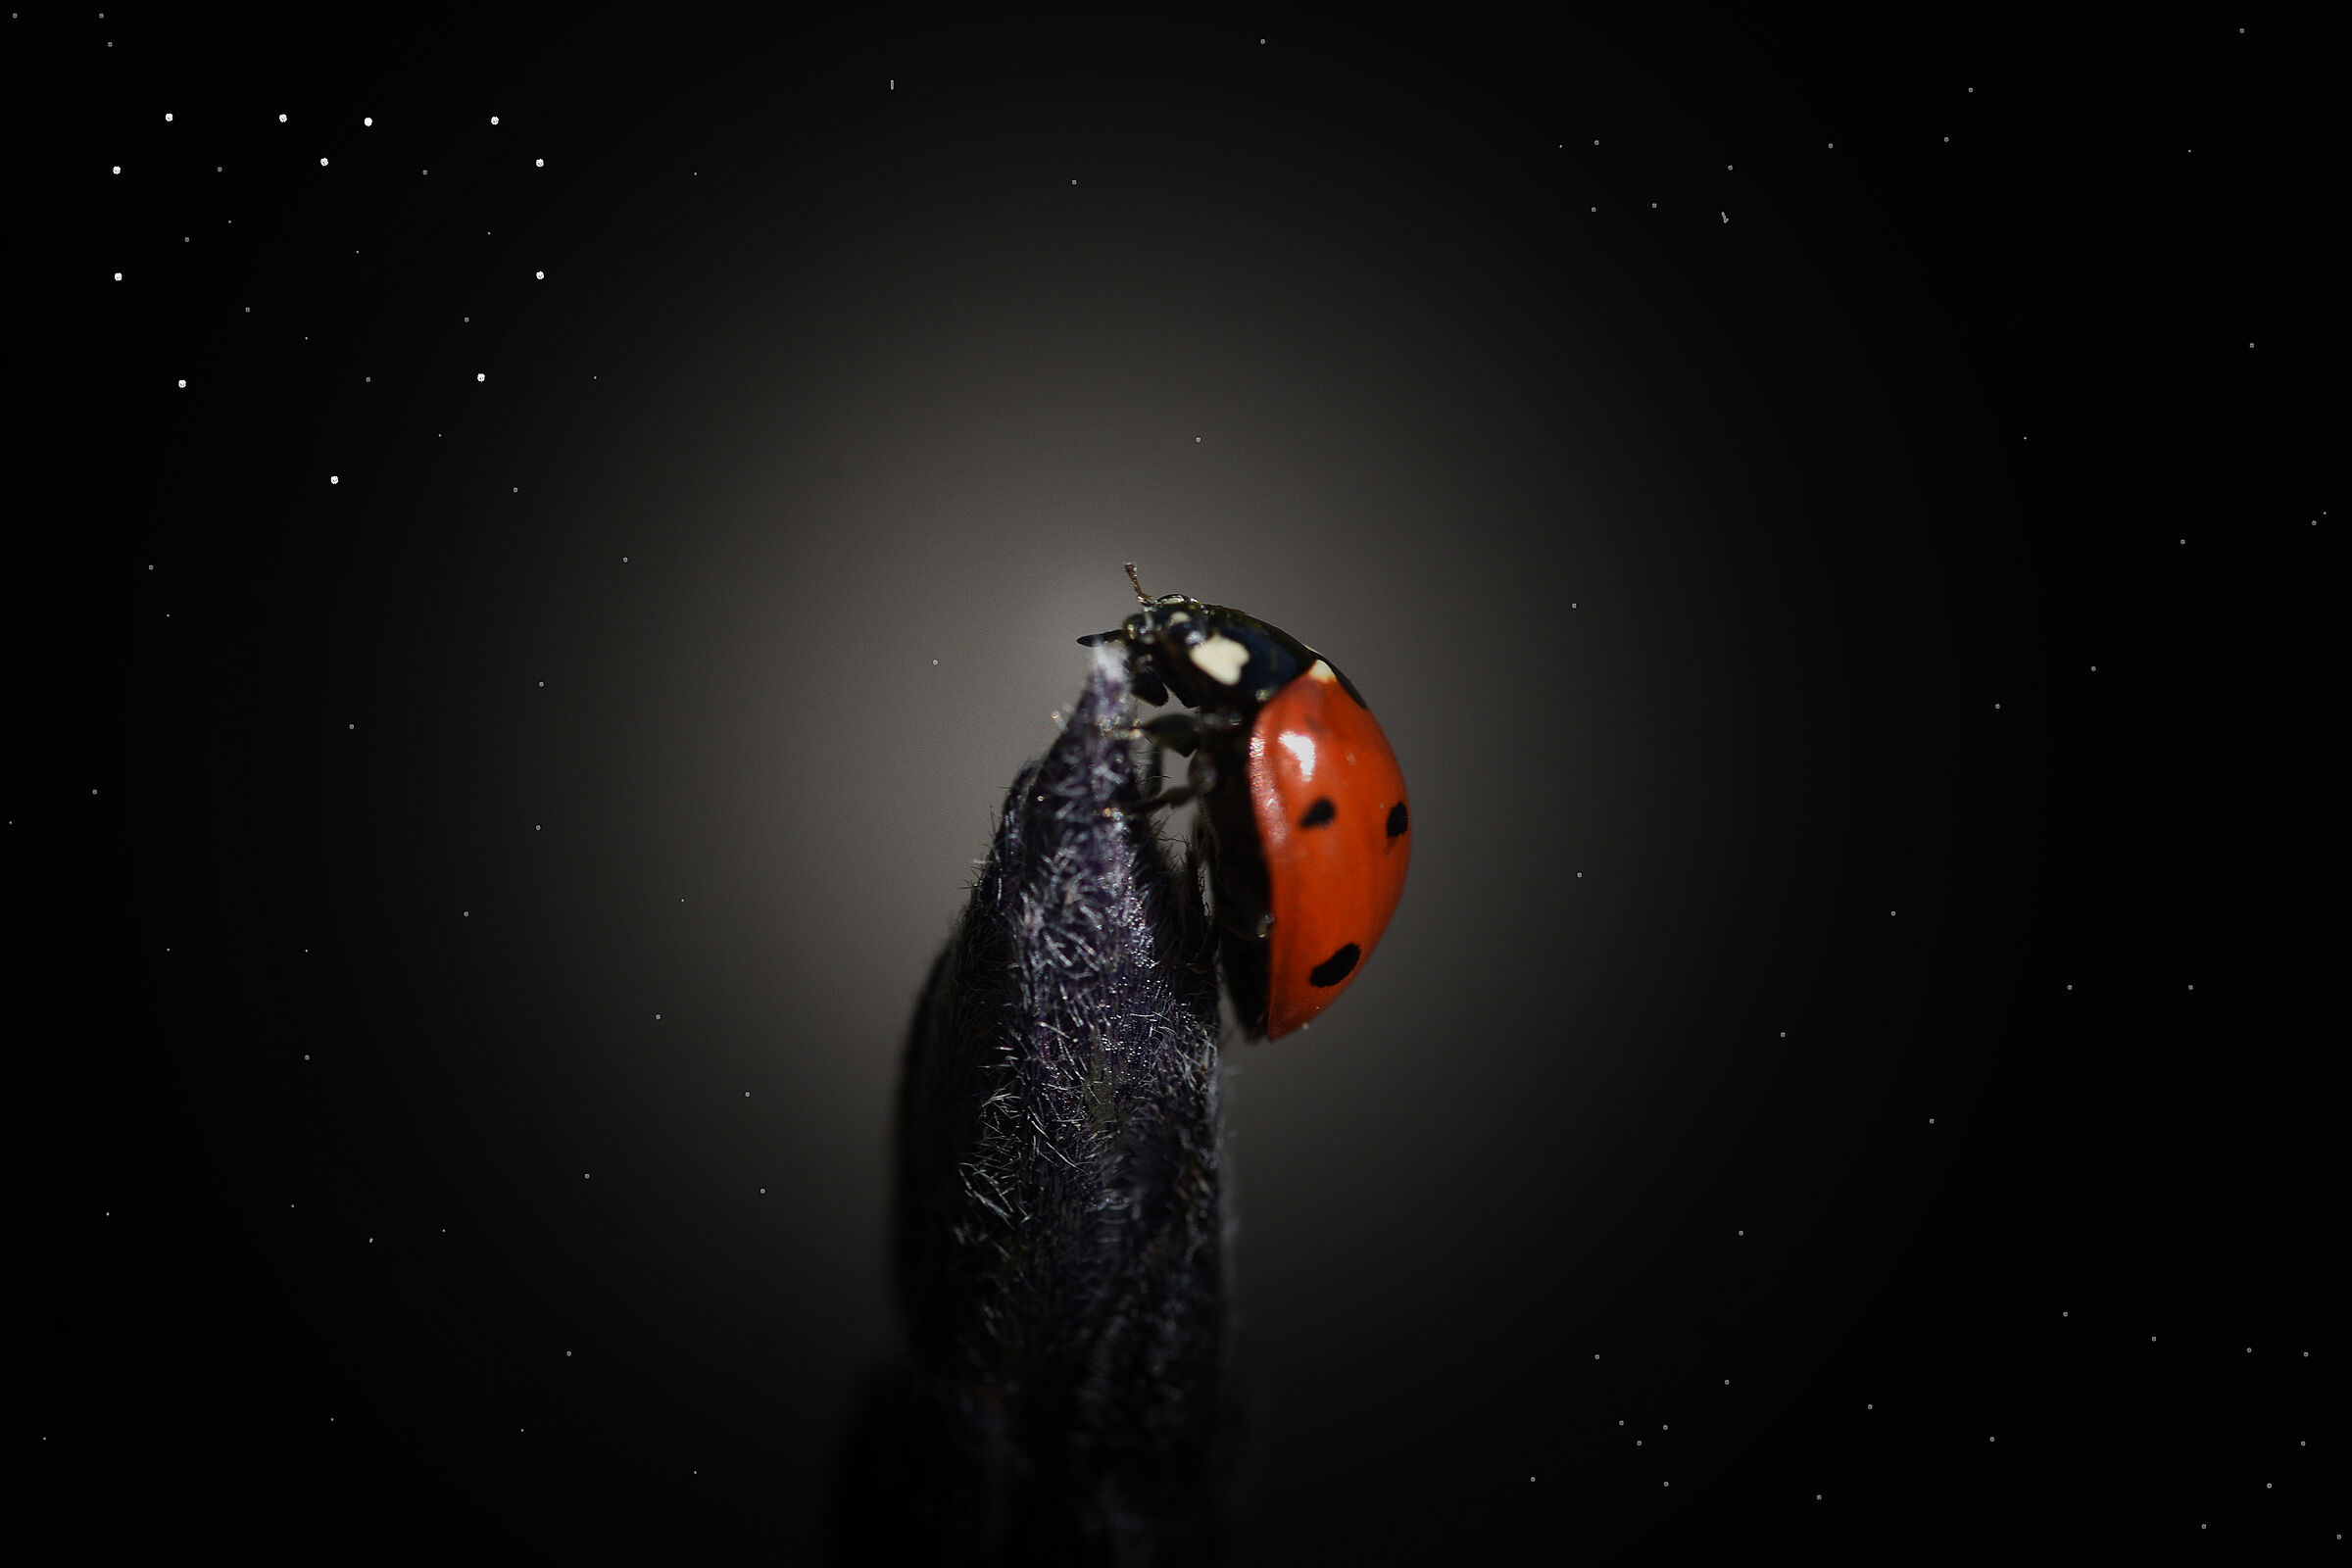 Ladybug and the constellation of the heart...